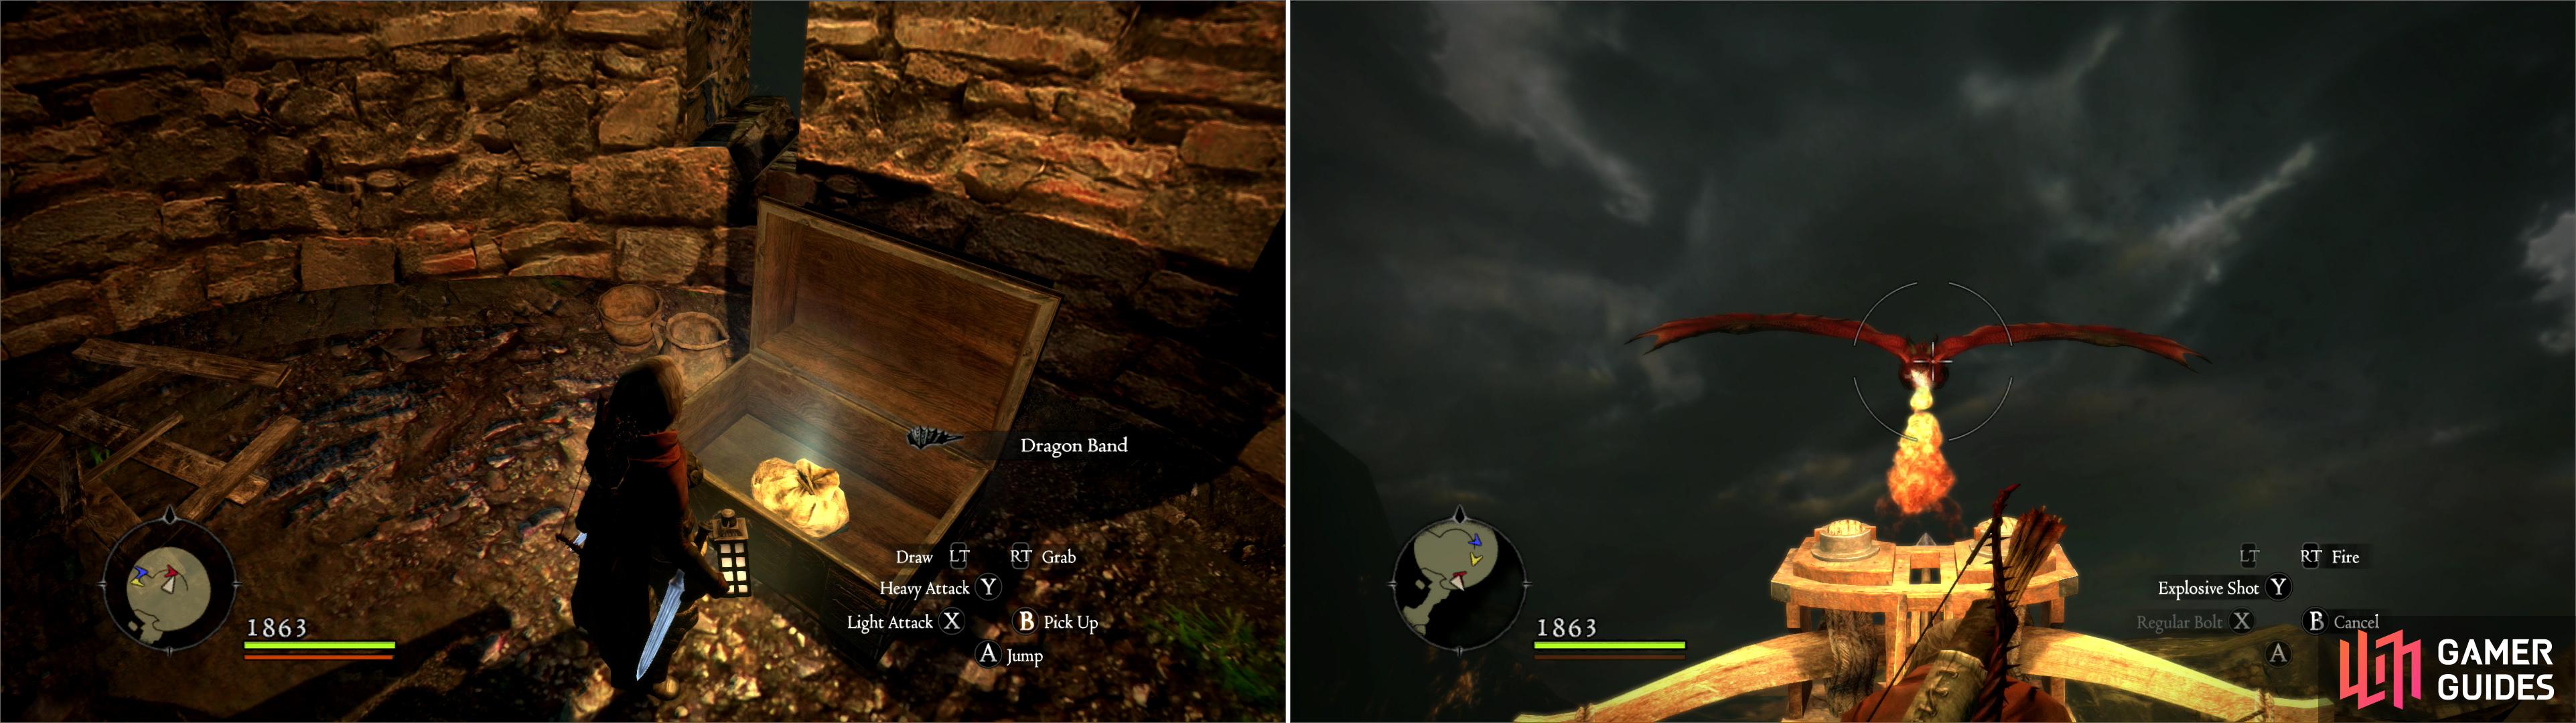 Don’t neglect to pick up loot as you chase the Dragon, as there’s plenty of fine gear to be found (left). Man a ballista and shoot the Dragon as it approaches (right).